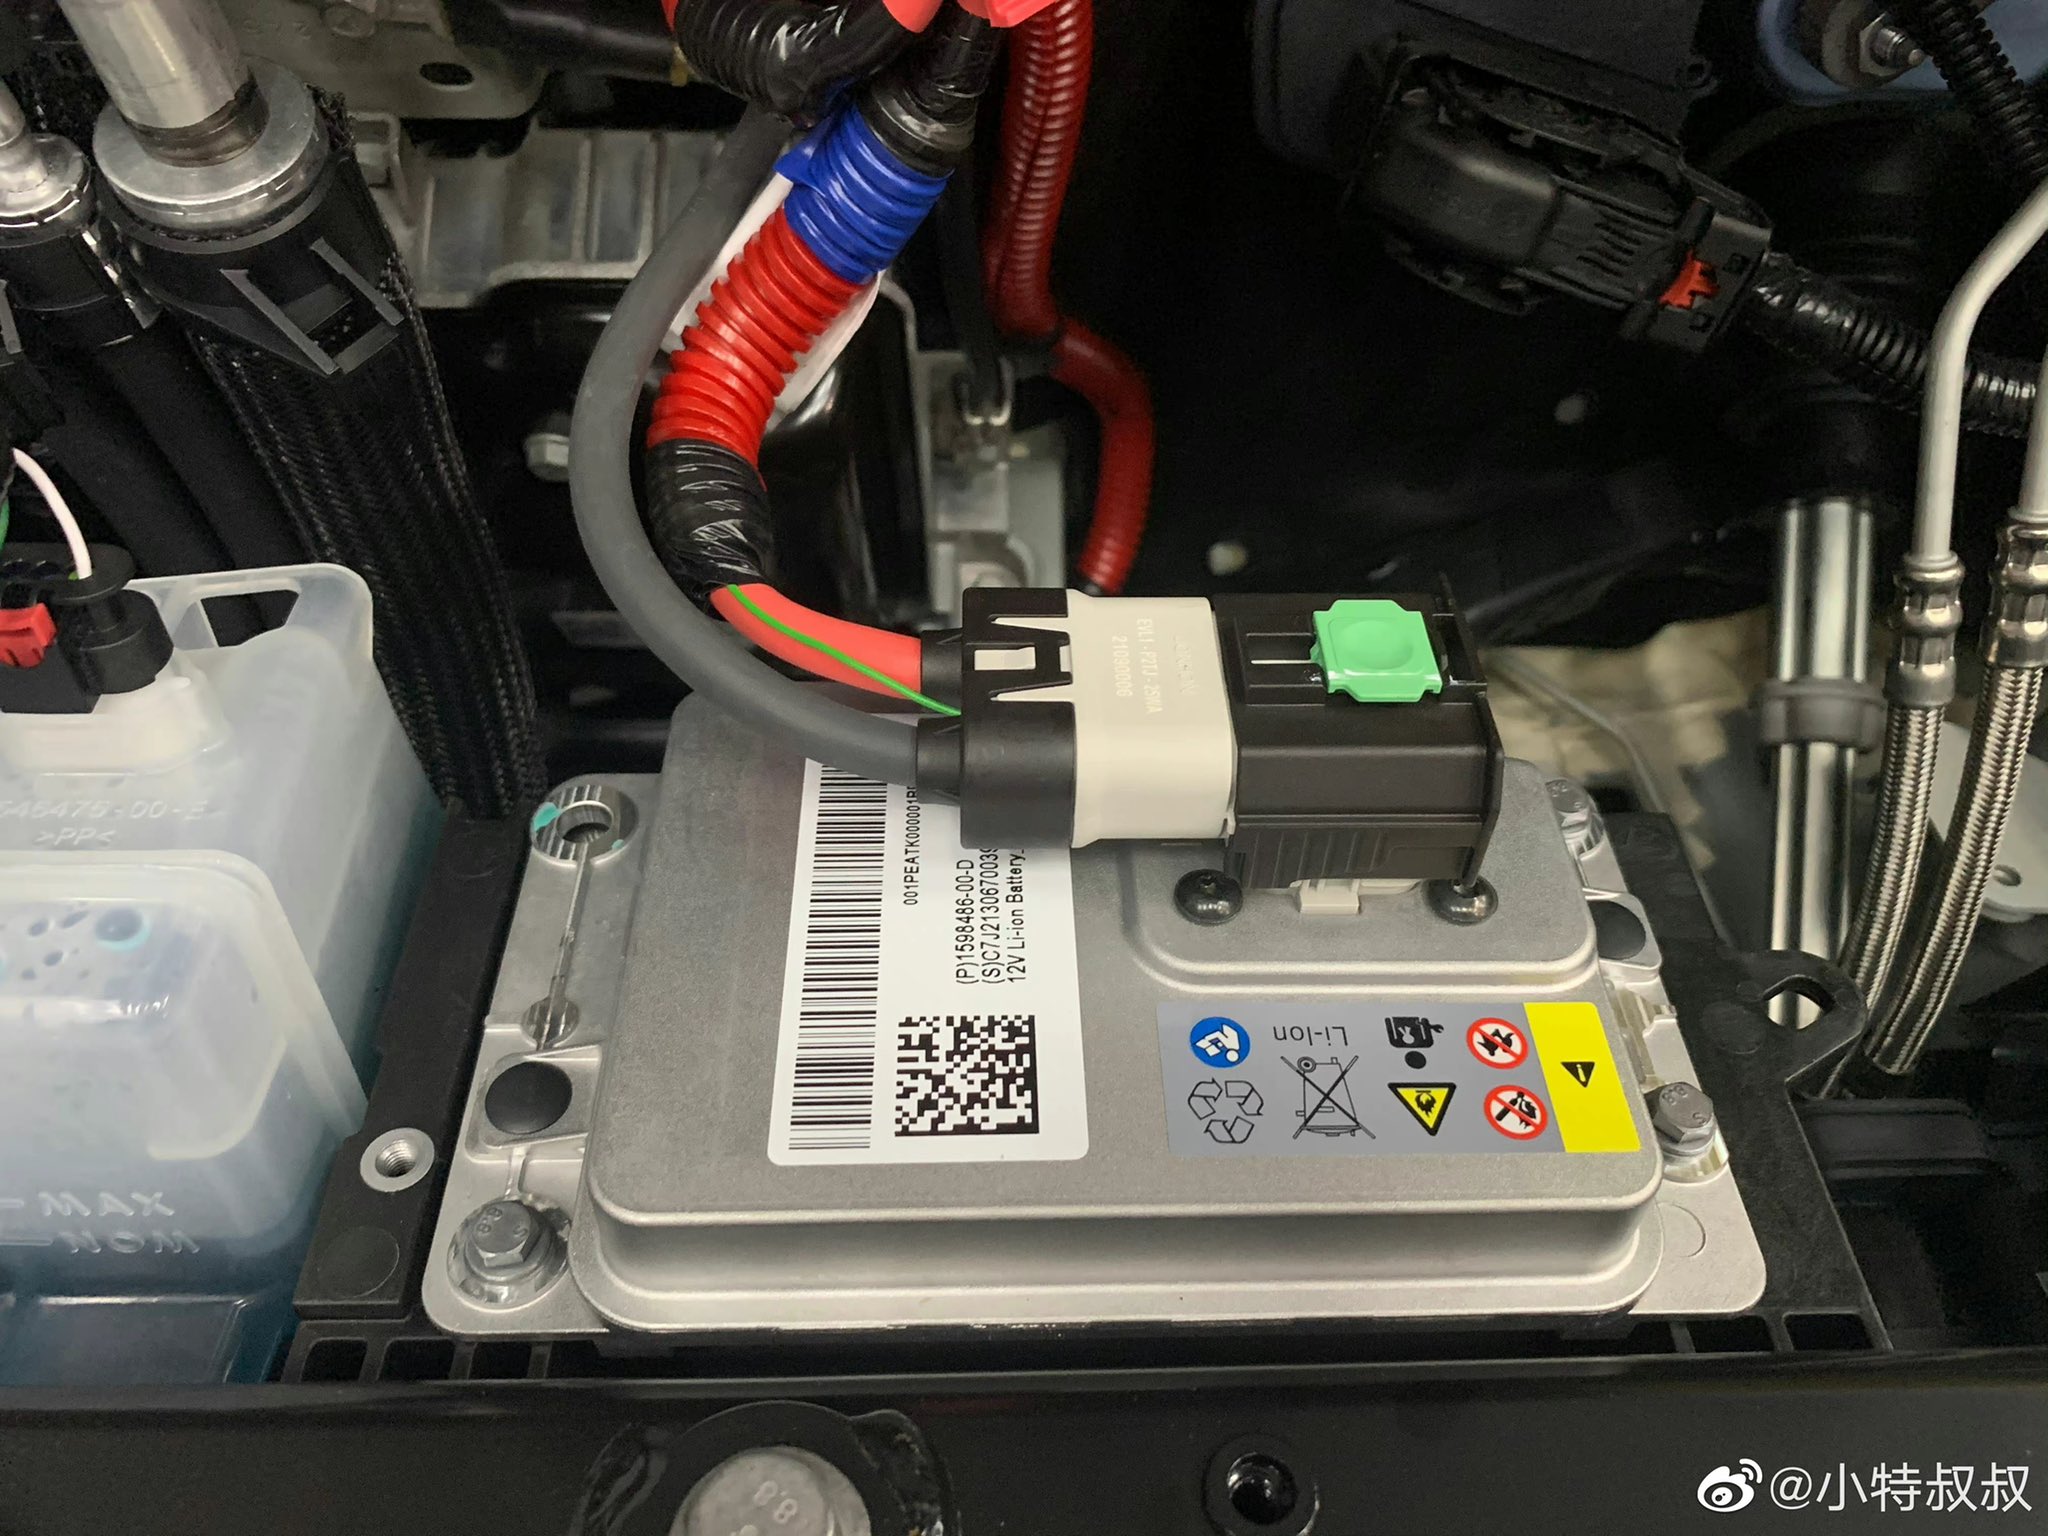 MadeinChina Tesla Model Y now includes 12v liion battery Confirmed